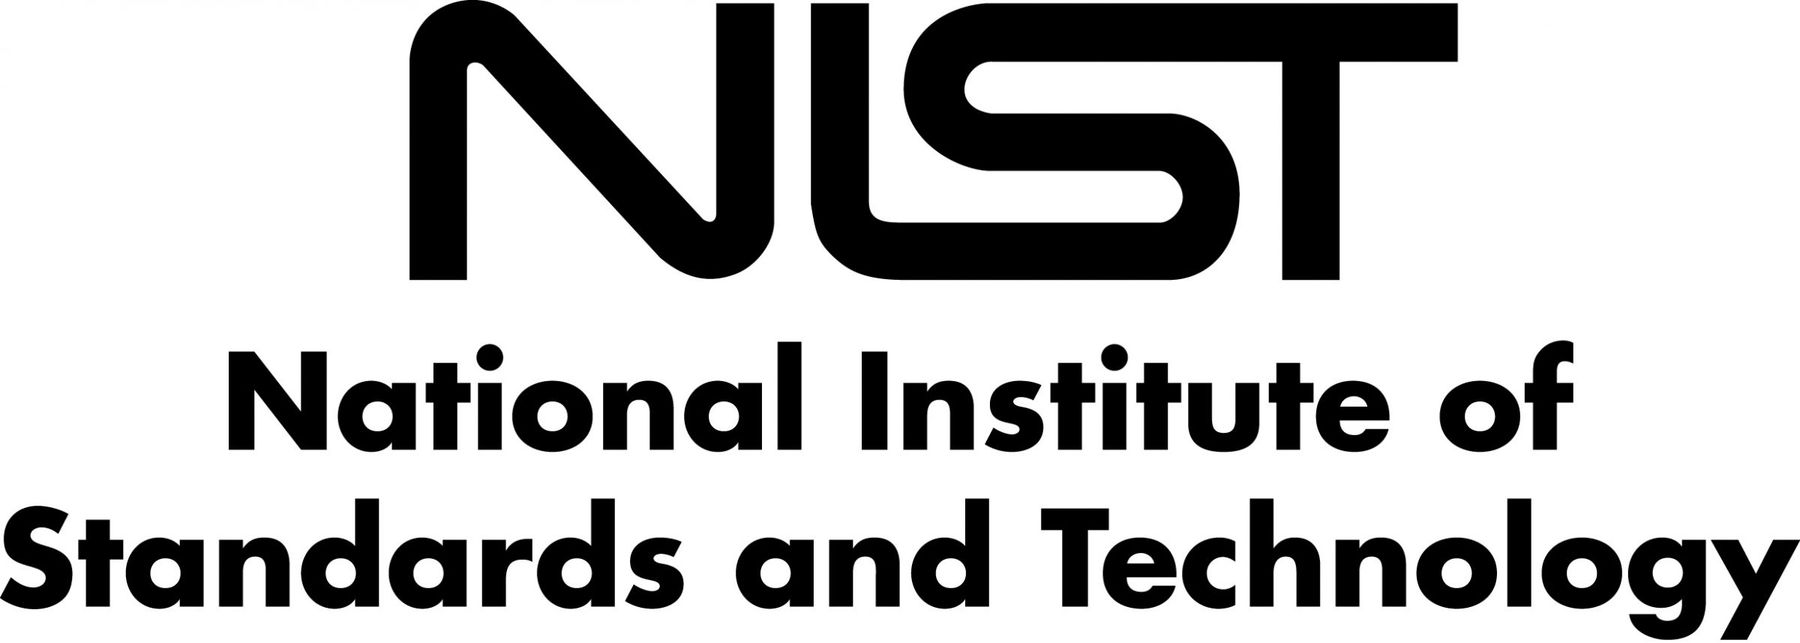 Postquantum cryptography Inria well represented at NIST Inria